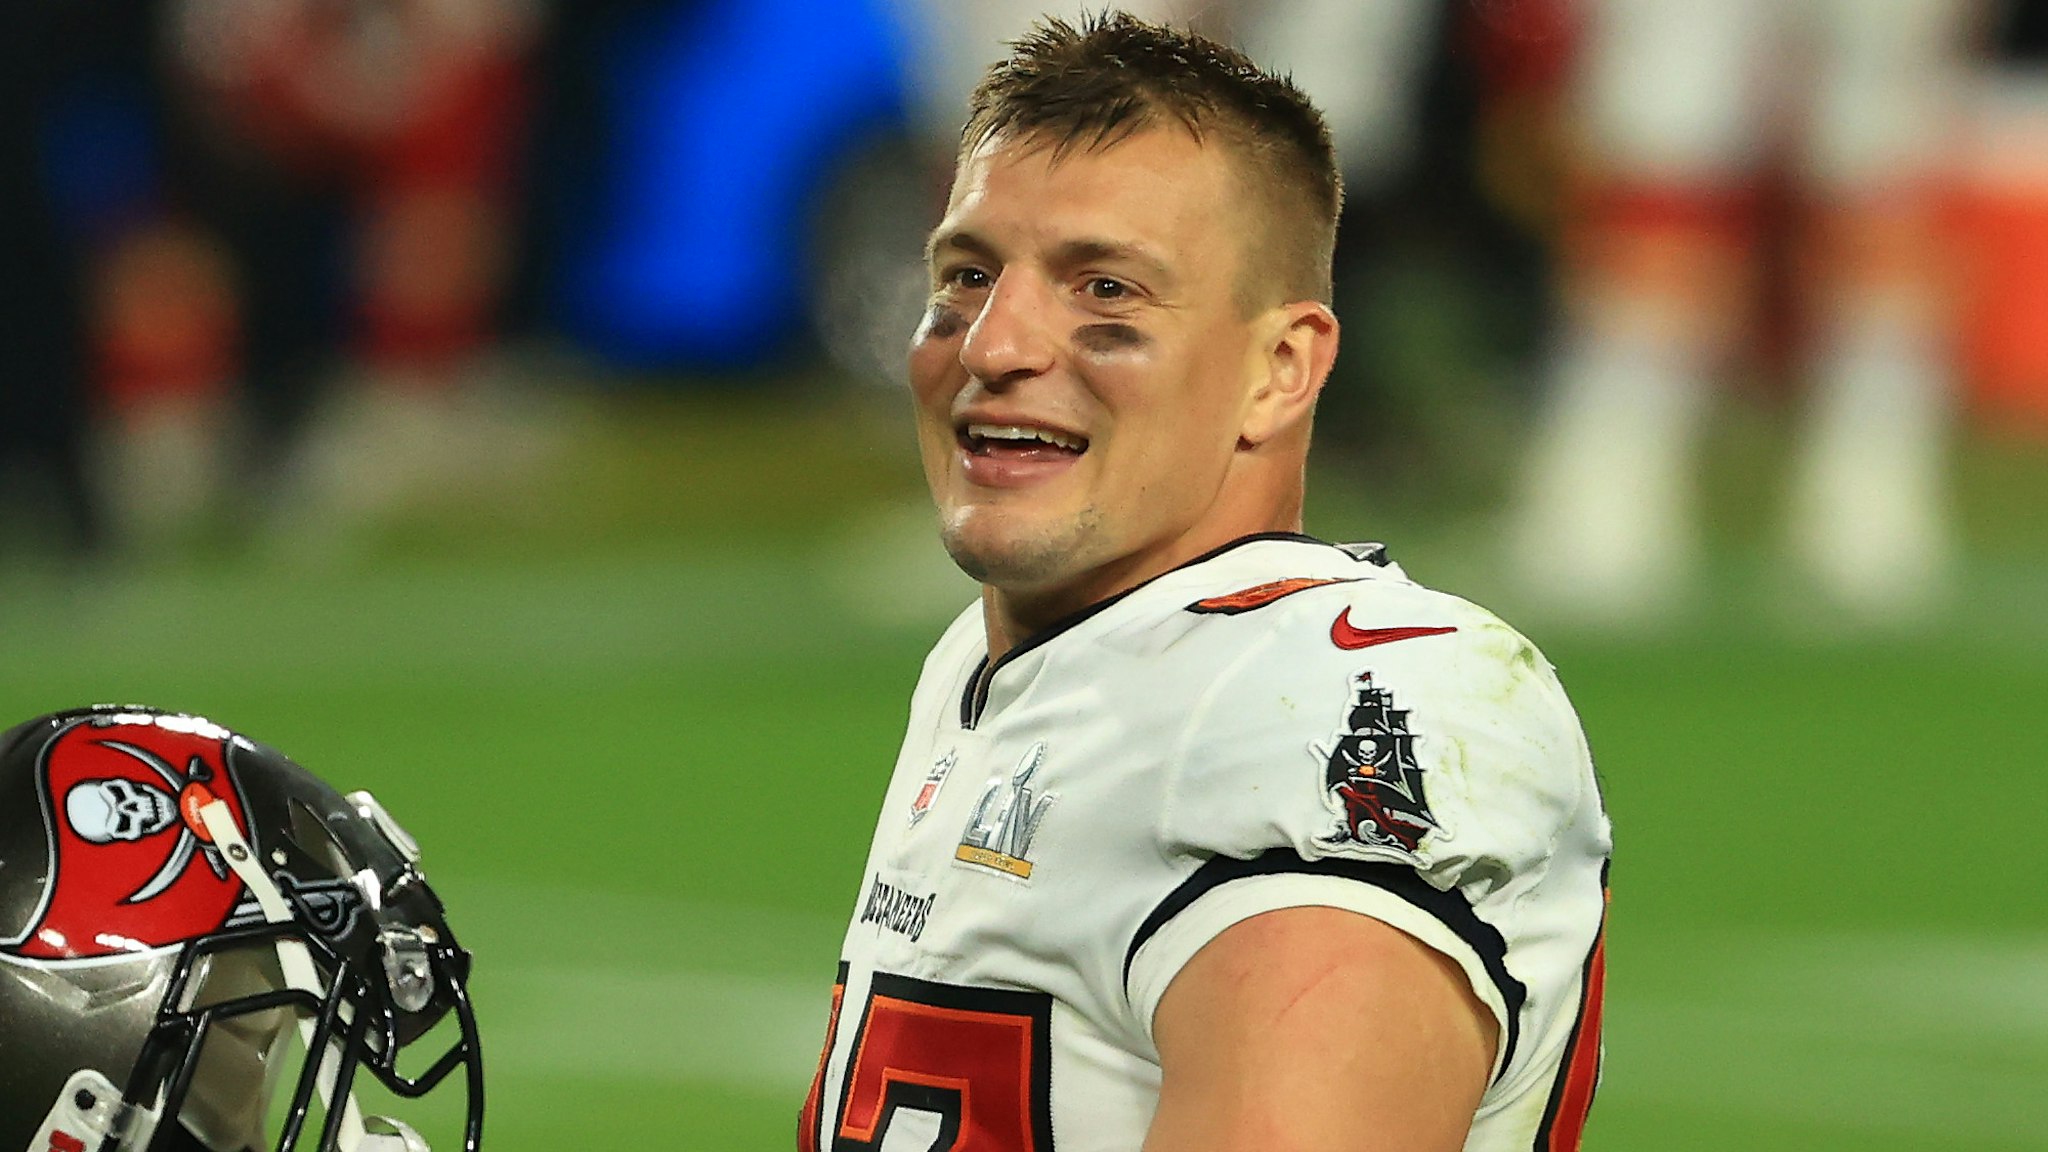 Rob Gronkowski #87 of the Tampa Bay Buccaneers reacts after defeating the Kansas City Chiefs in Super Bowl LV at Raymond James Stadium on February 07, 2021 in Tampa, Florida.